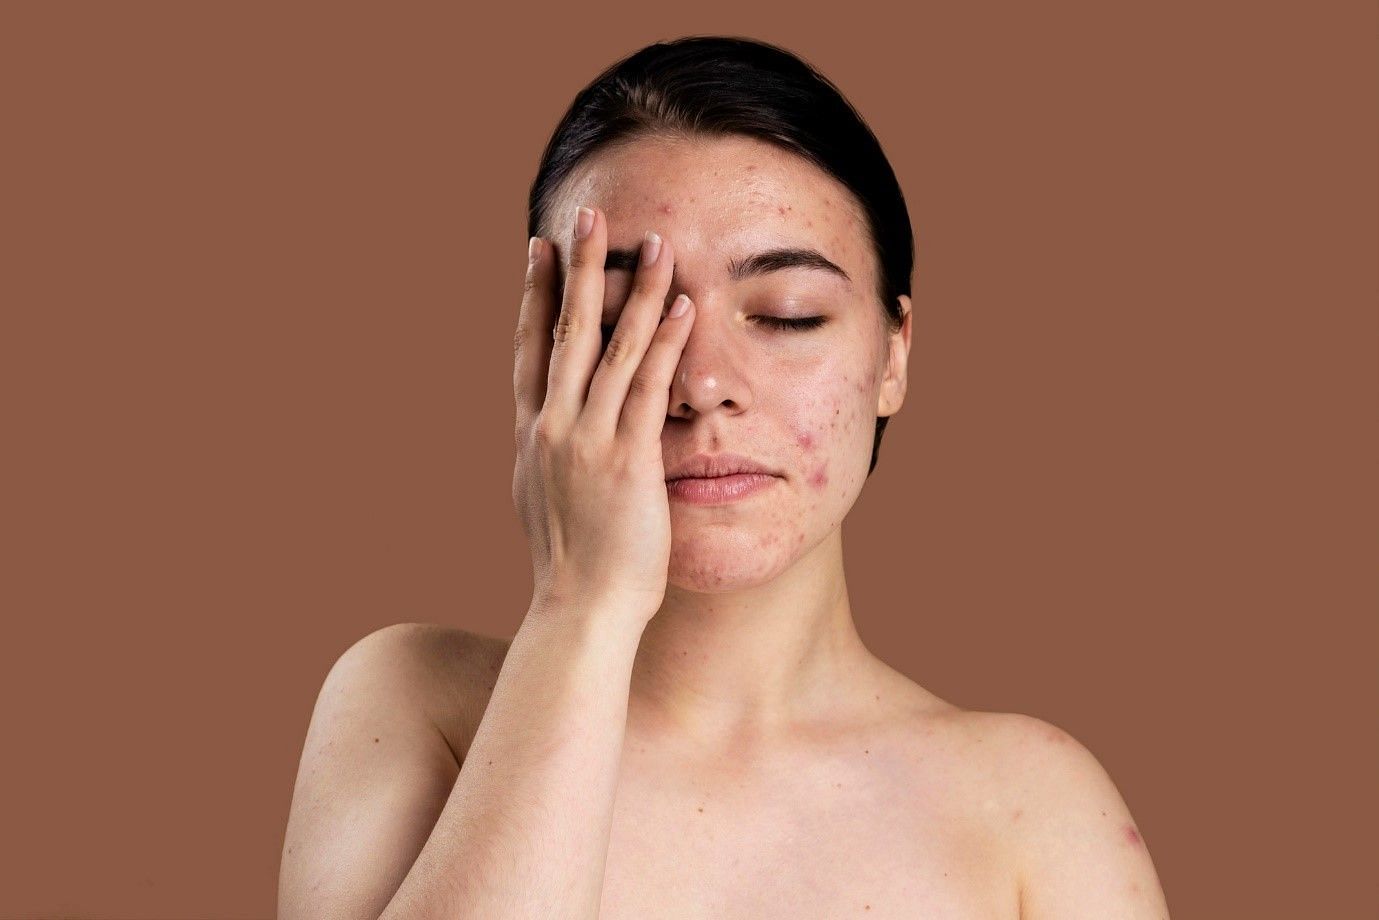 Use a facewash with ingredients like vitamin C and niacinamide to reduce acne marks (Image by Freepik)